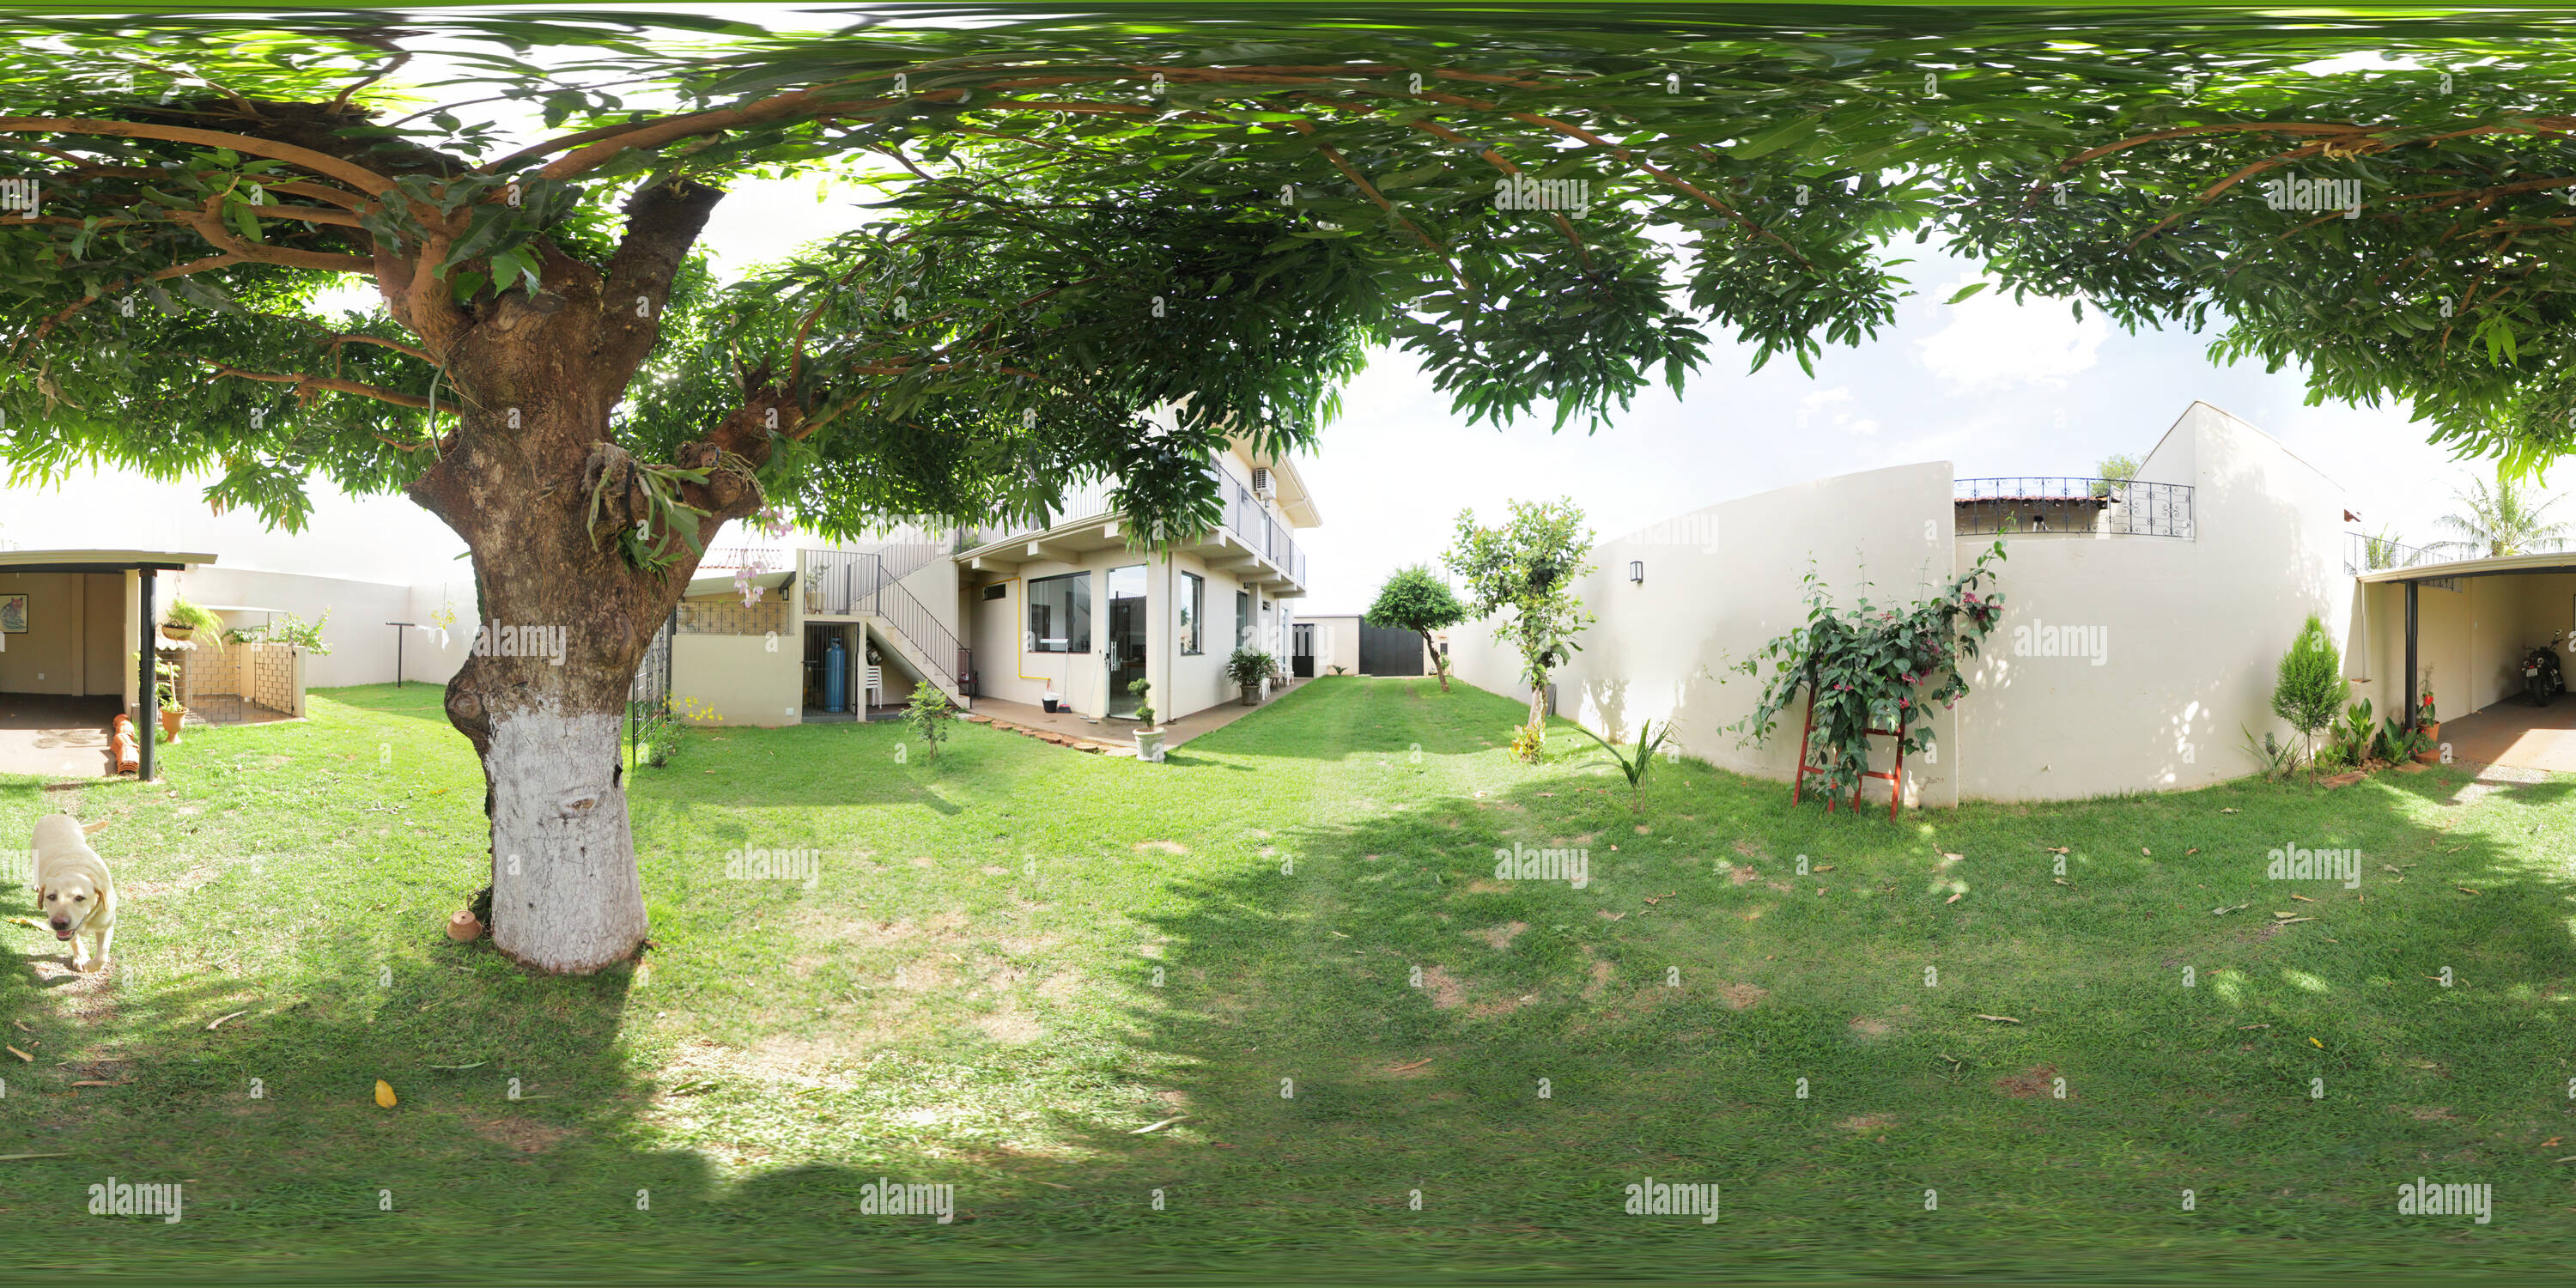 360 degree panoramic view of My house 2